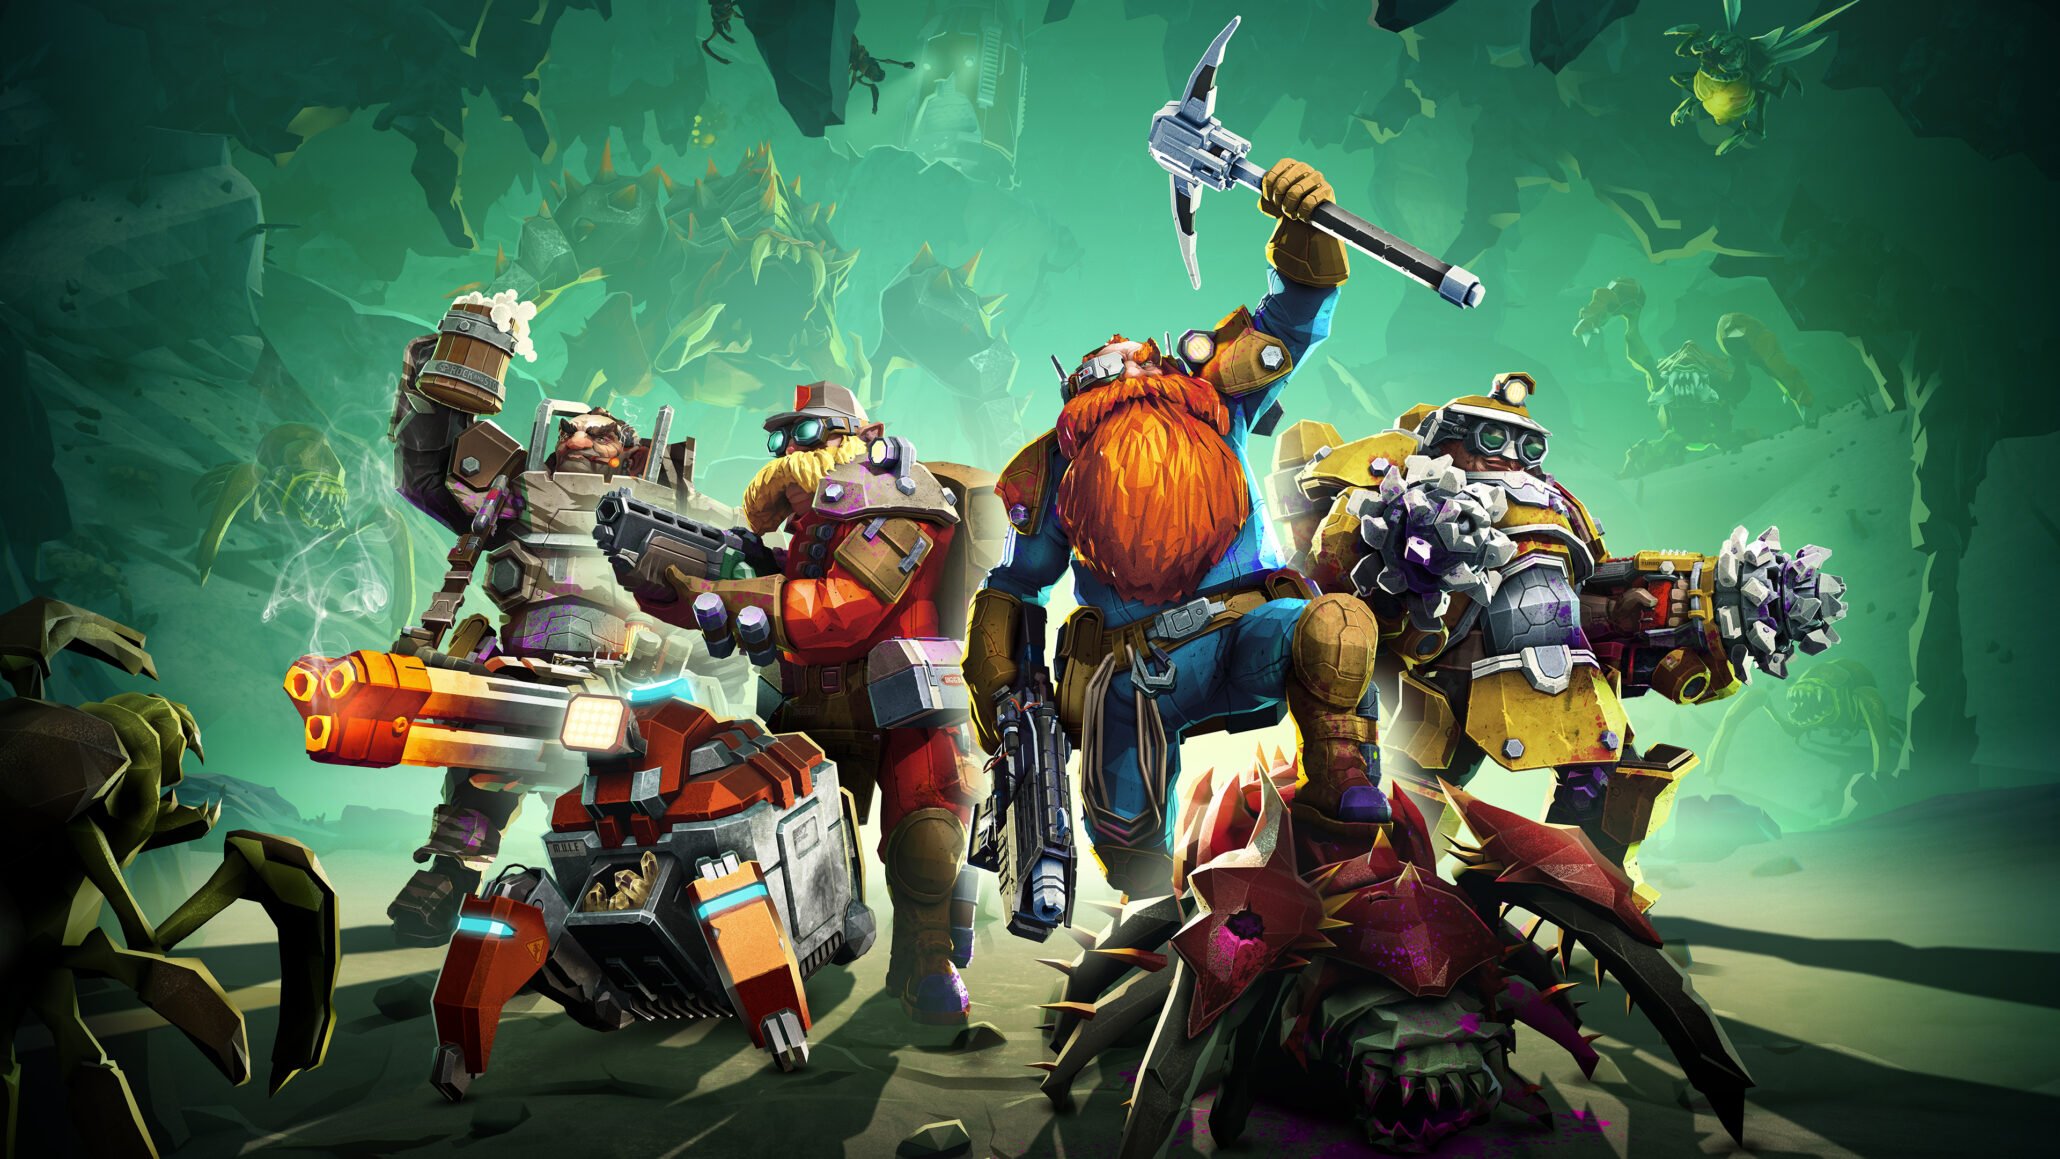 download deep rock galactic sale for free